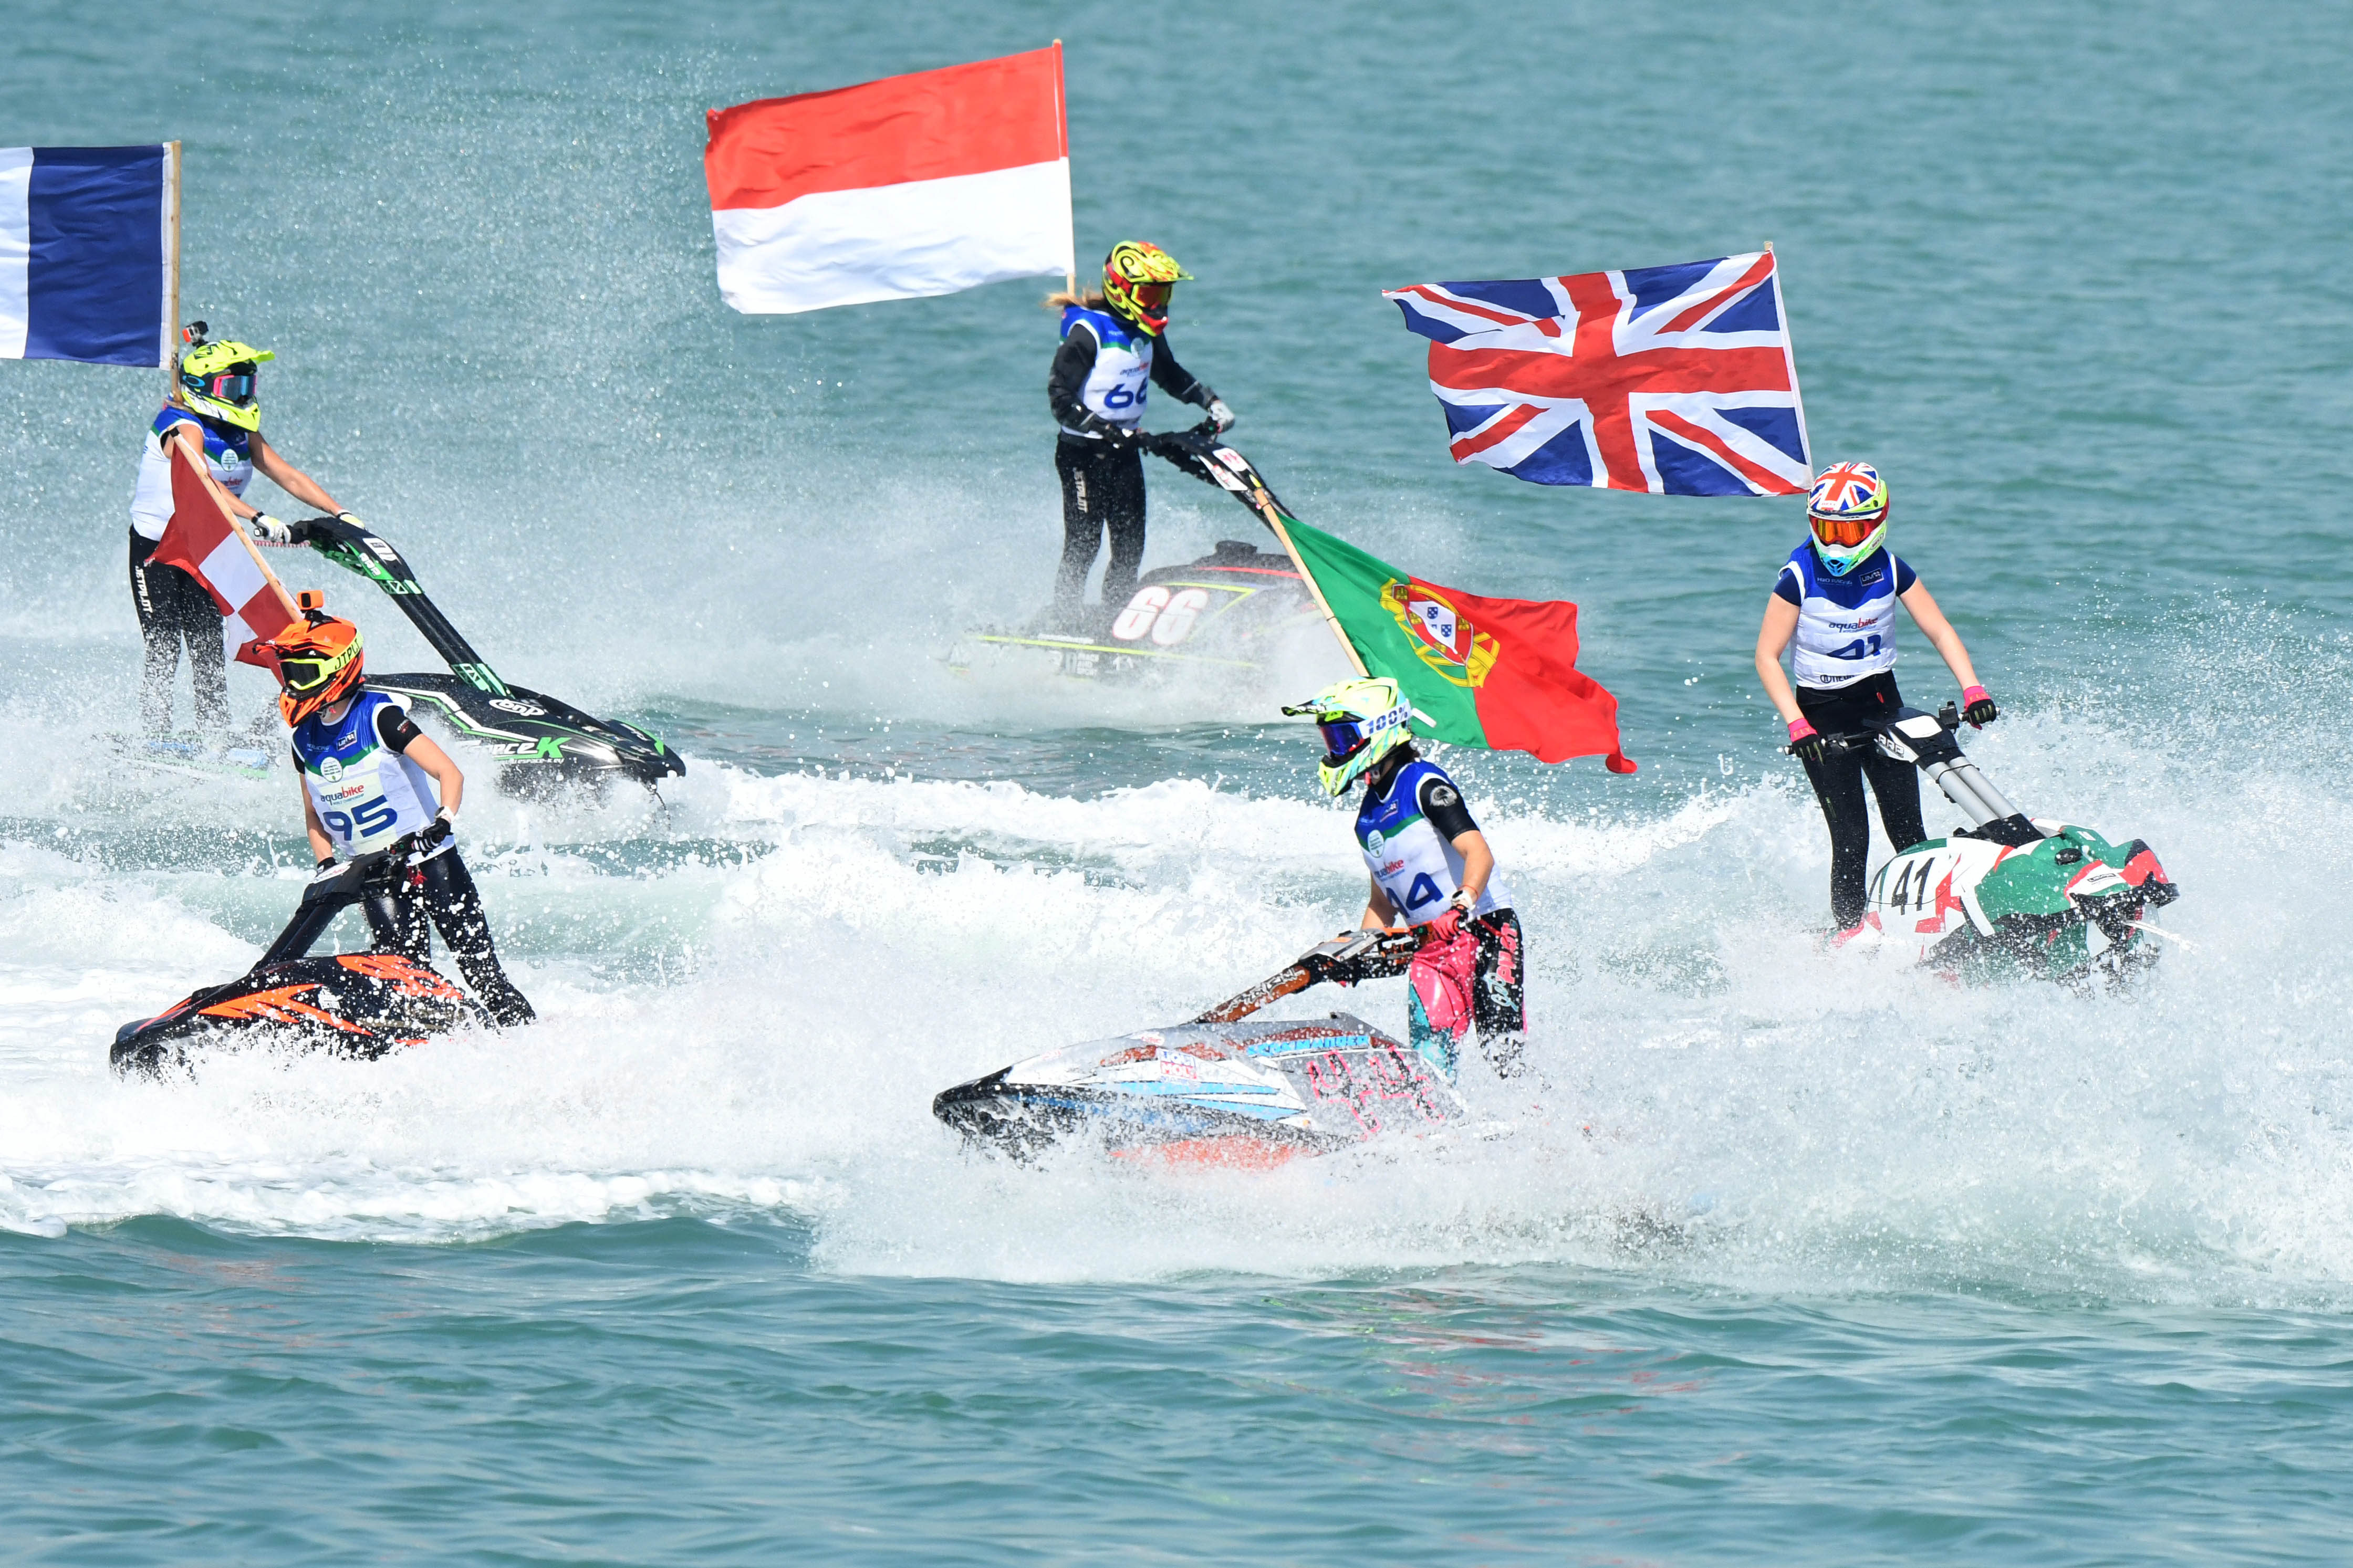 First day of Grand Prix of Kuwait sees impressive races